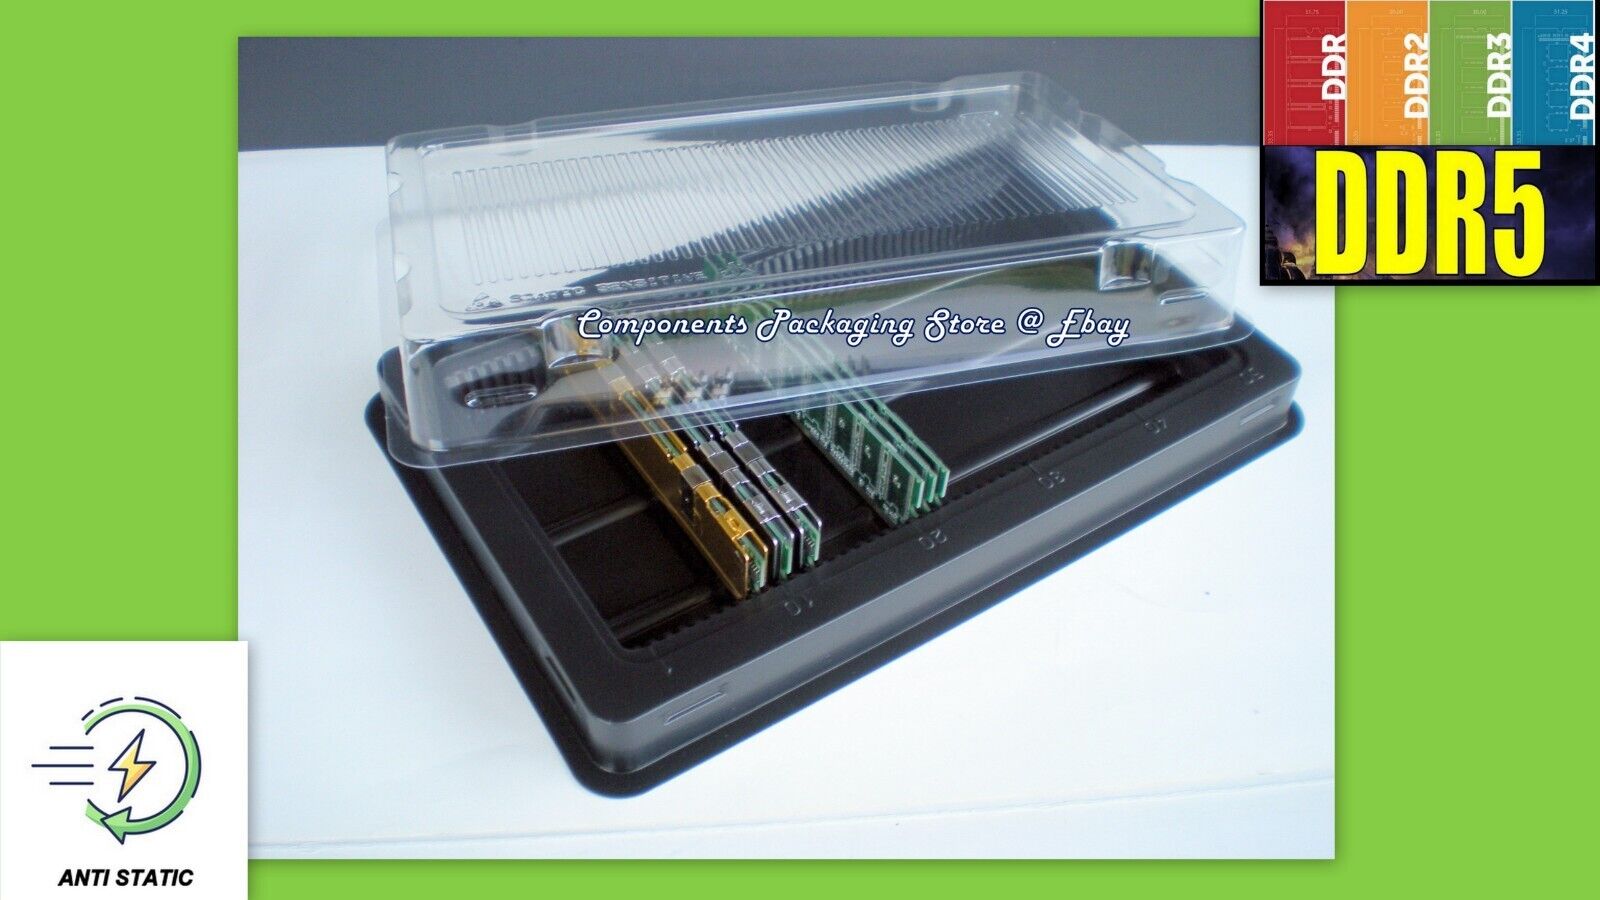 5 Trays for DDR5 DDR4 RAM Box Memory Case PC Server DIMM Modules  Fits  250 New